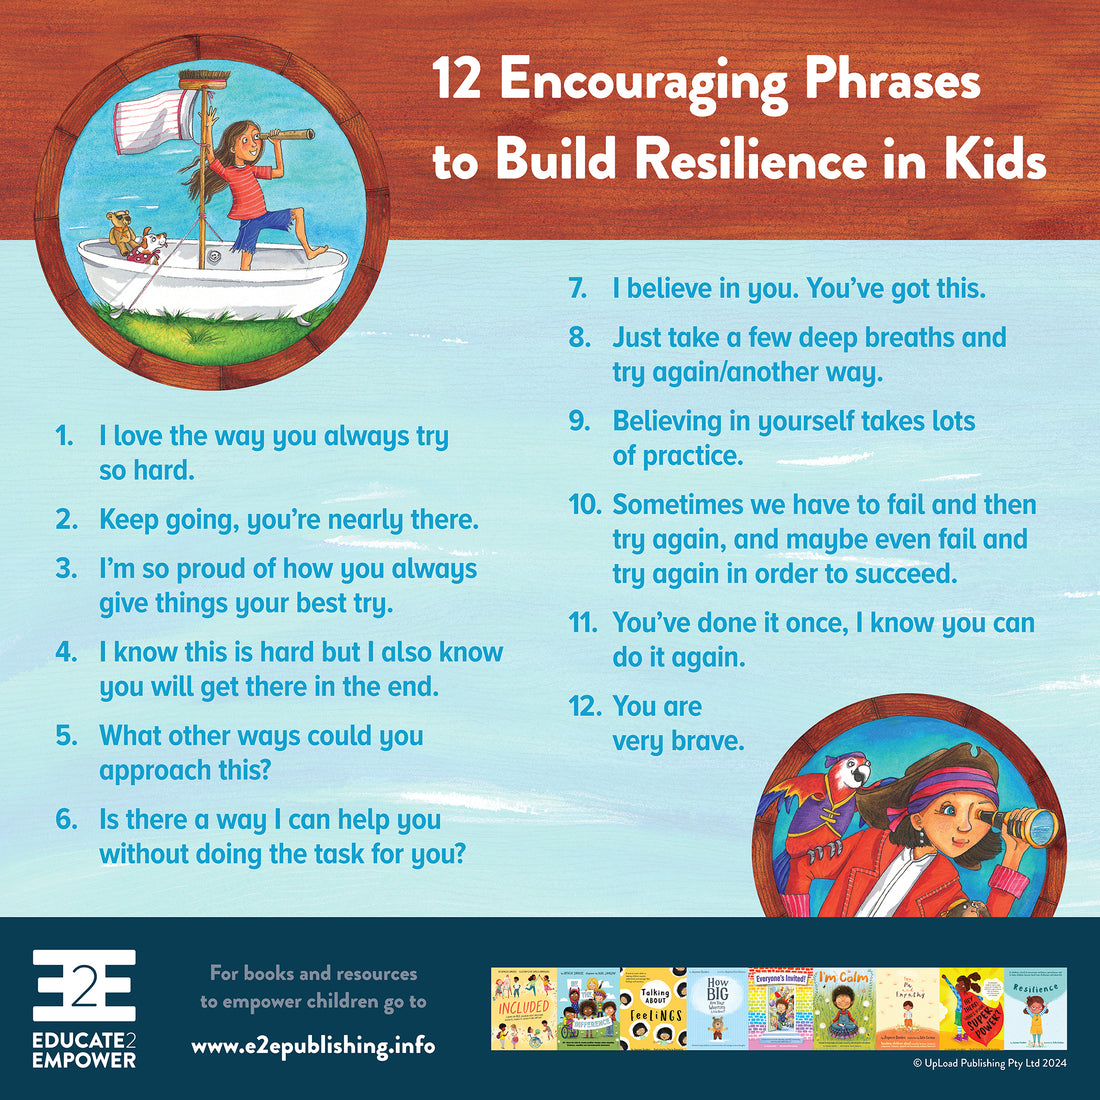 12 Encouraging Phrases to Build Resilience in Kids